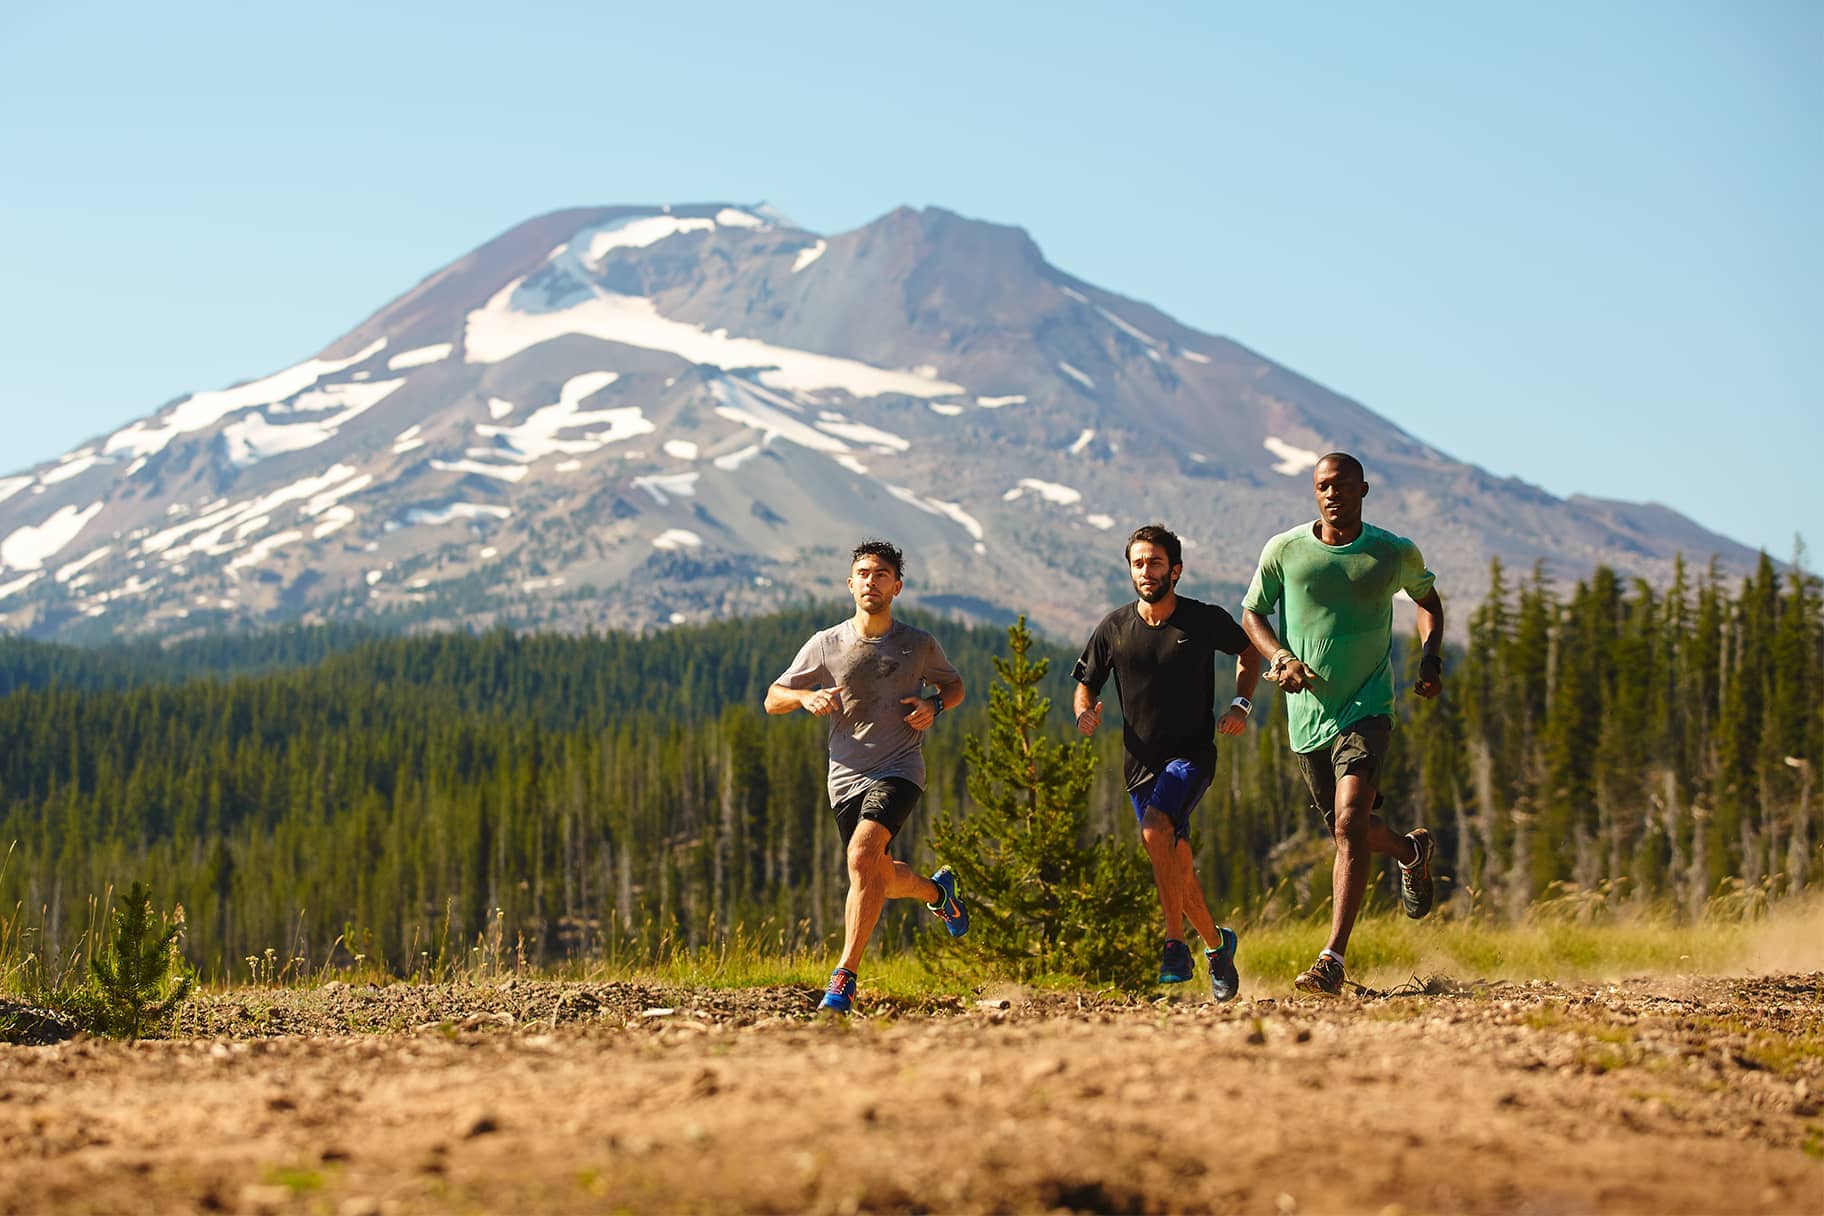 7 Outdoor Workouts Experts Recommend Trying This Summer. Nike CA